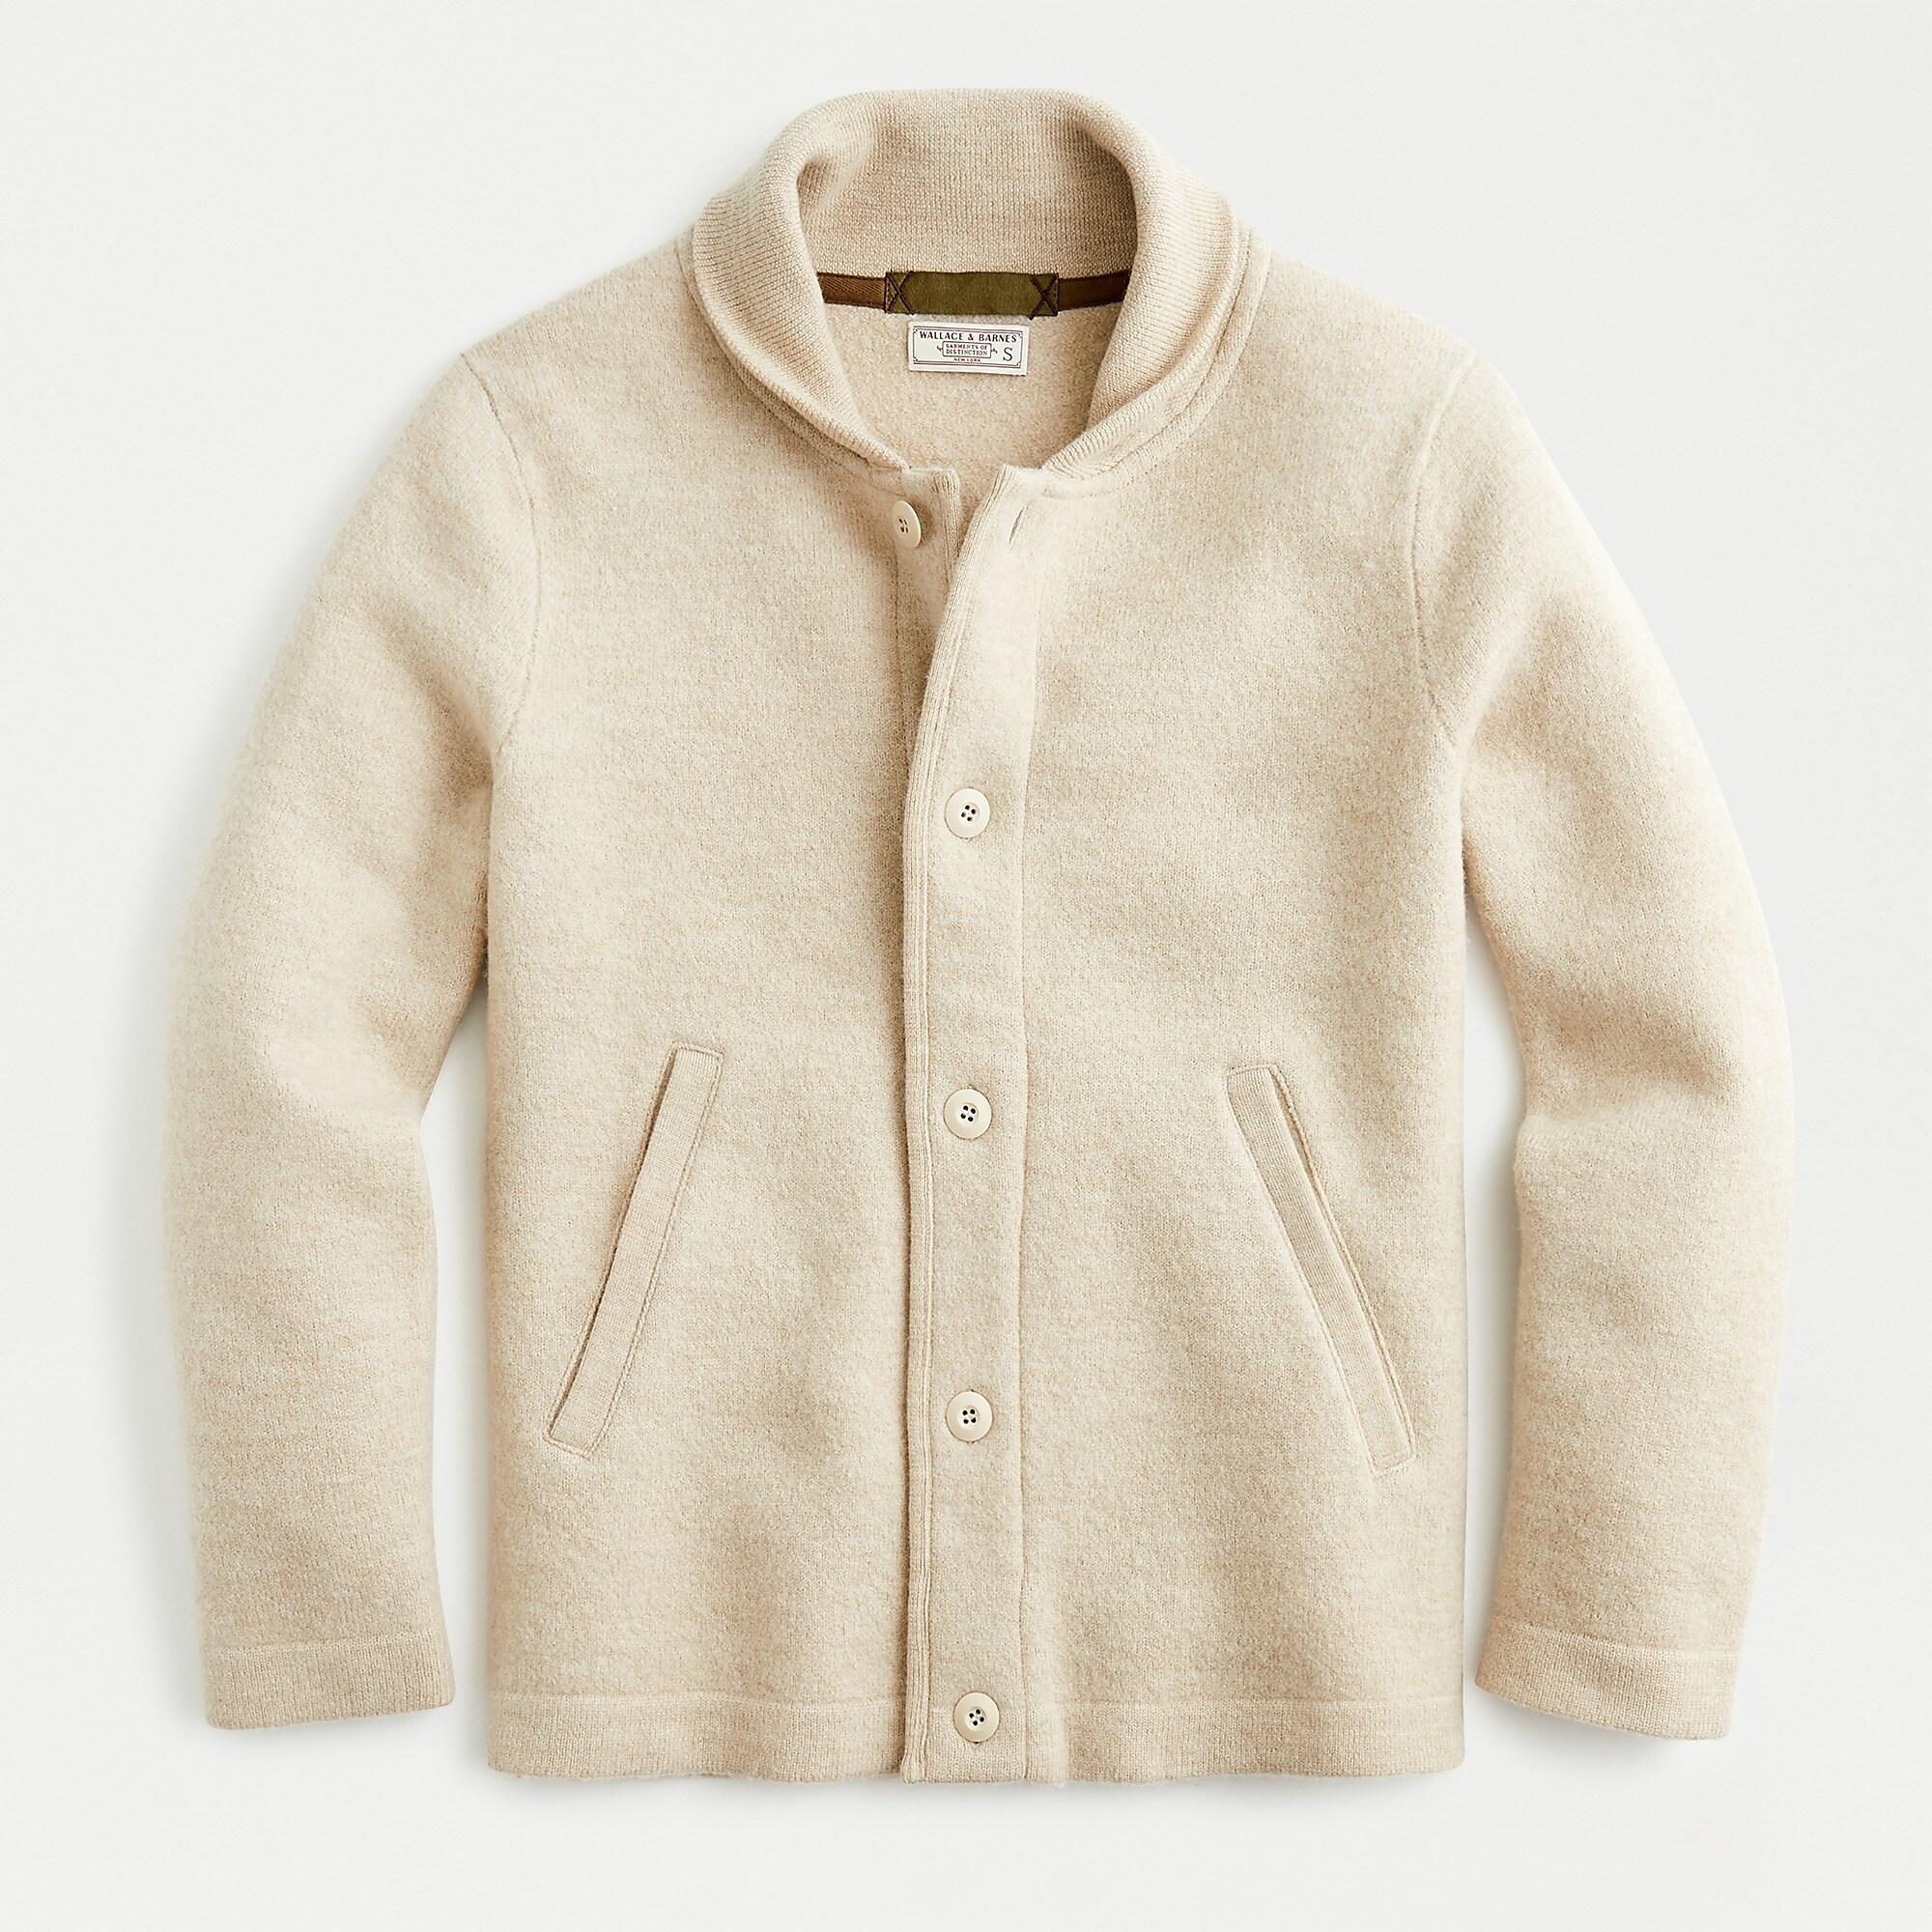 J.Crew Wallace & Barnes Boiled Merino Wool Deck Jacket in Natural for ...